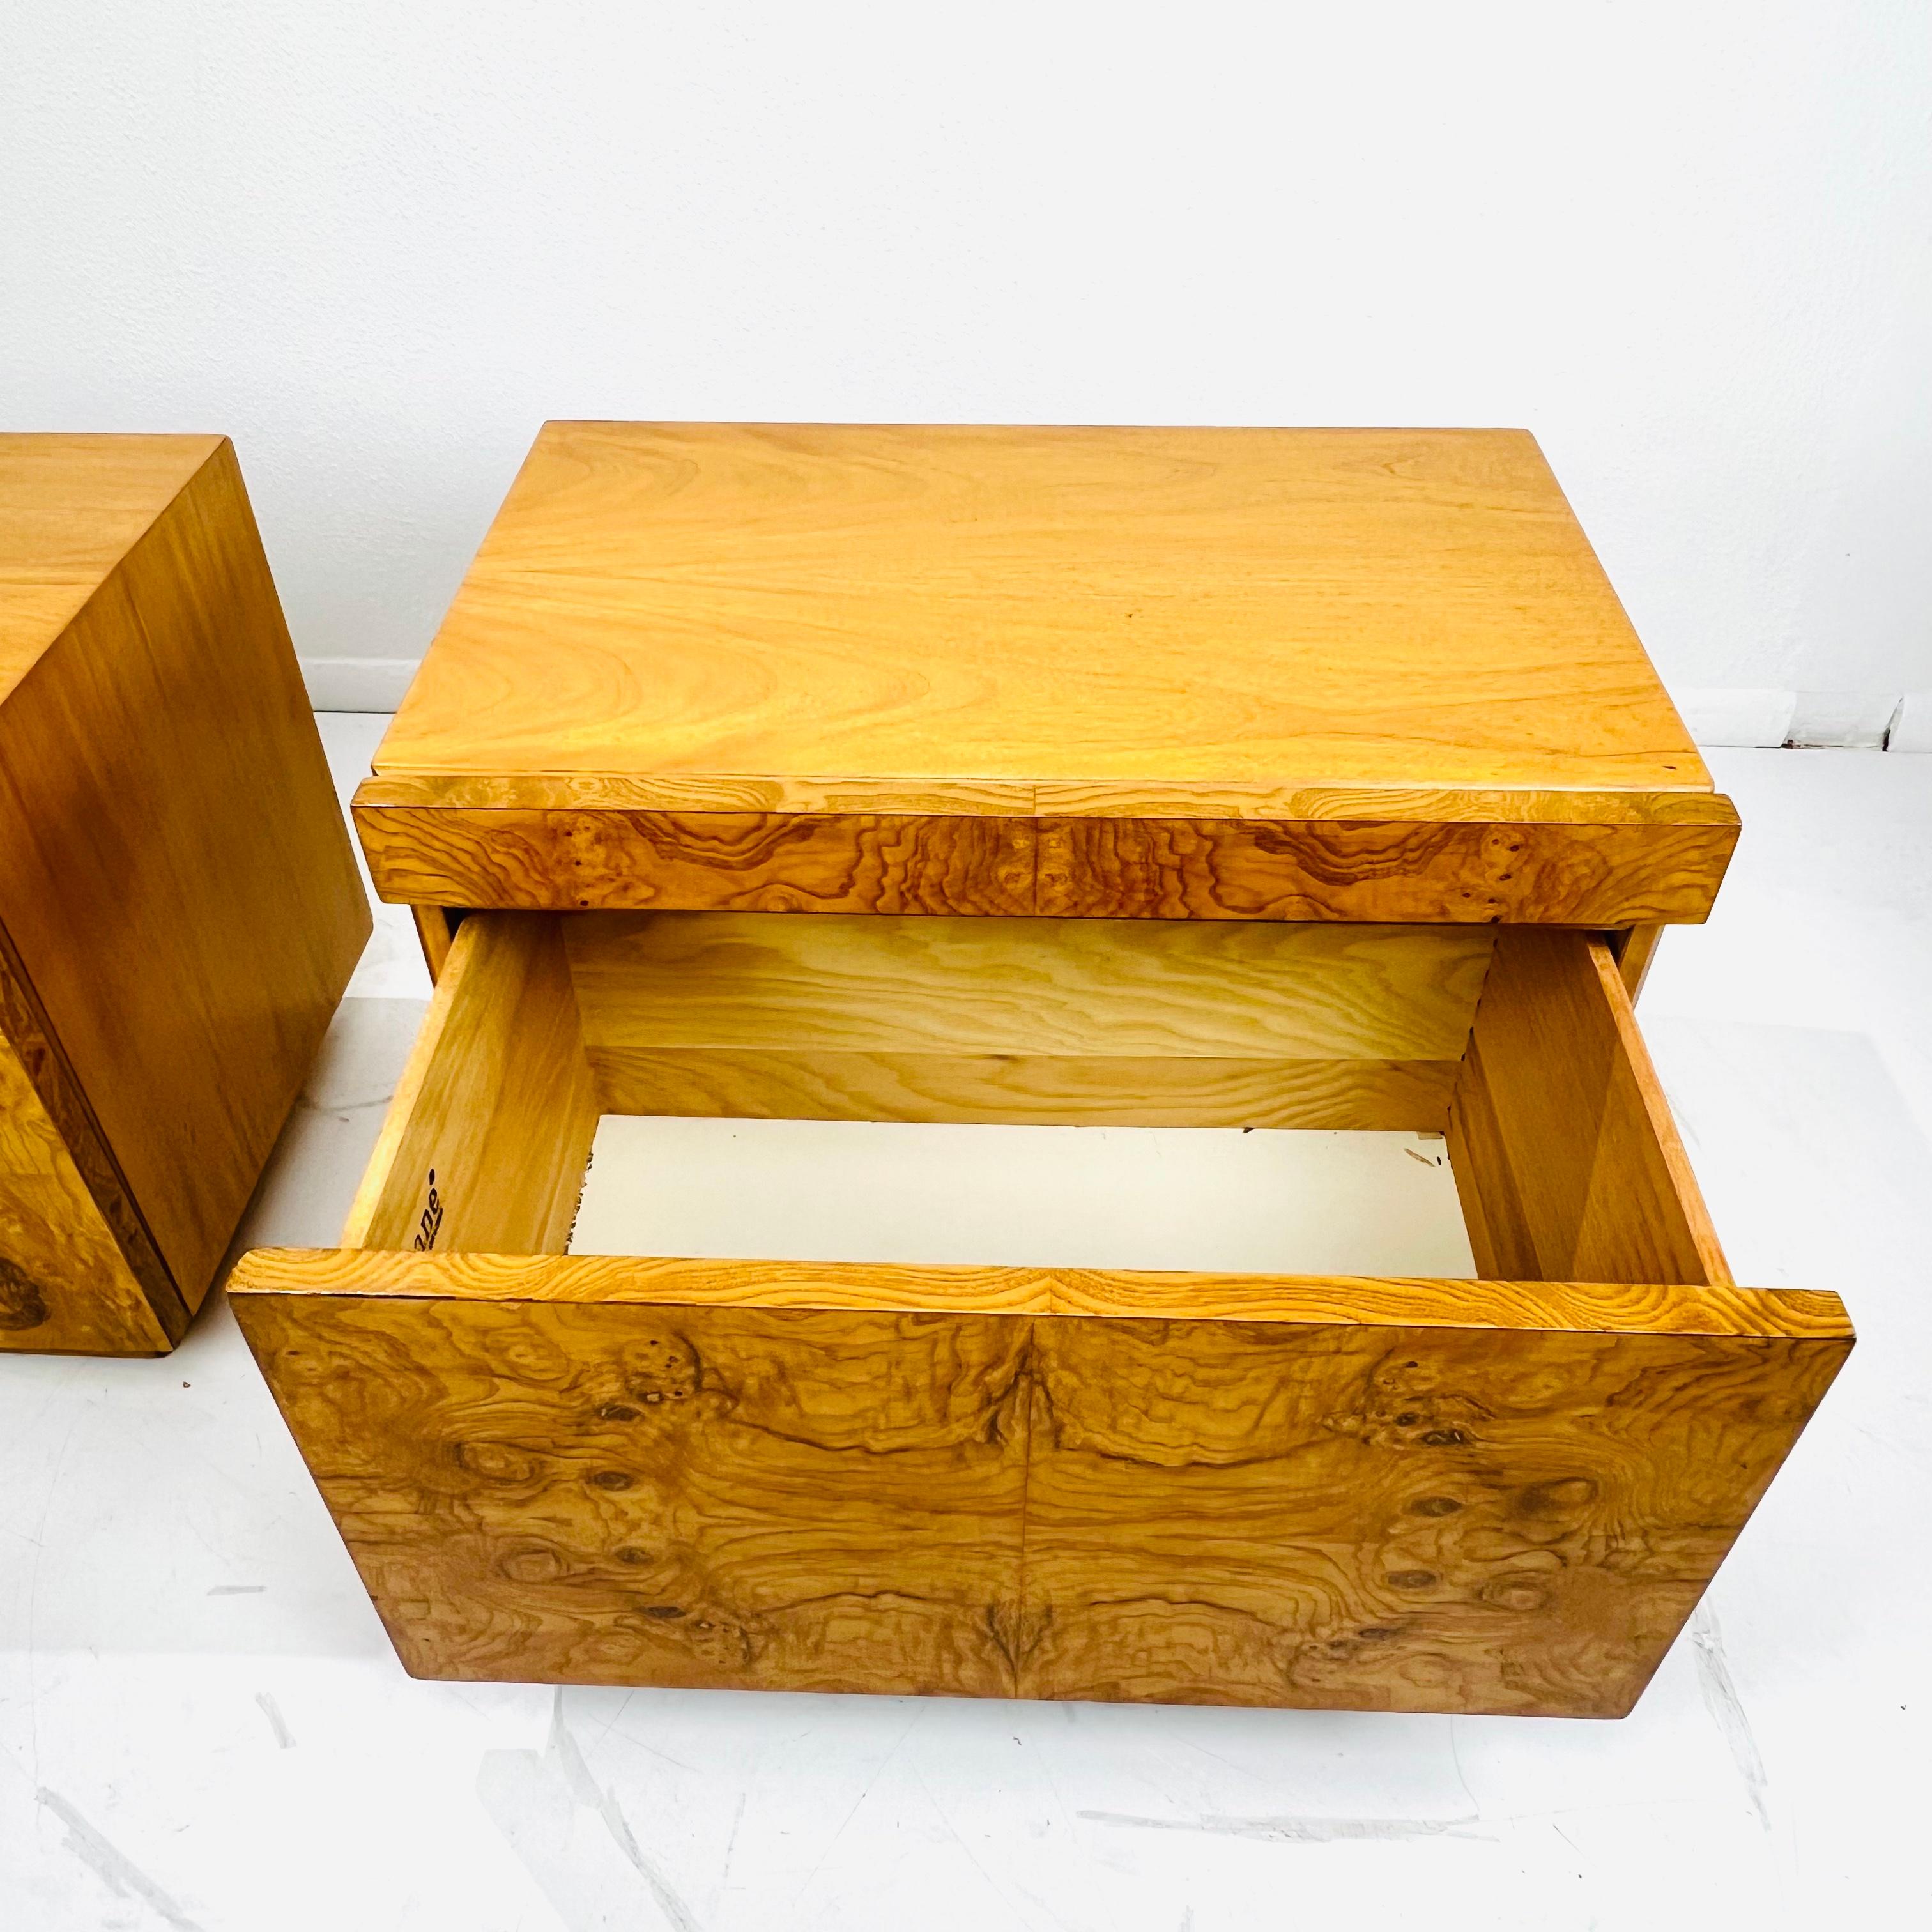 Pair of Burl Wood Nightstands by Milo Baughman for Lane For Sale 6